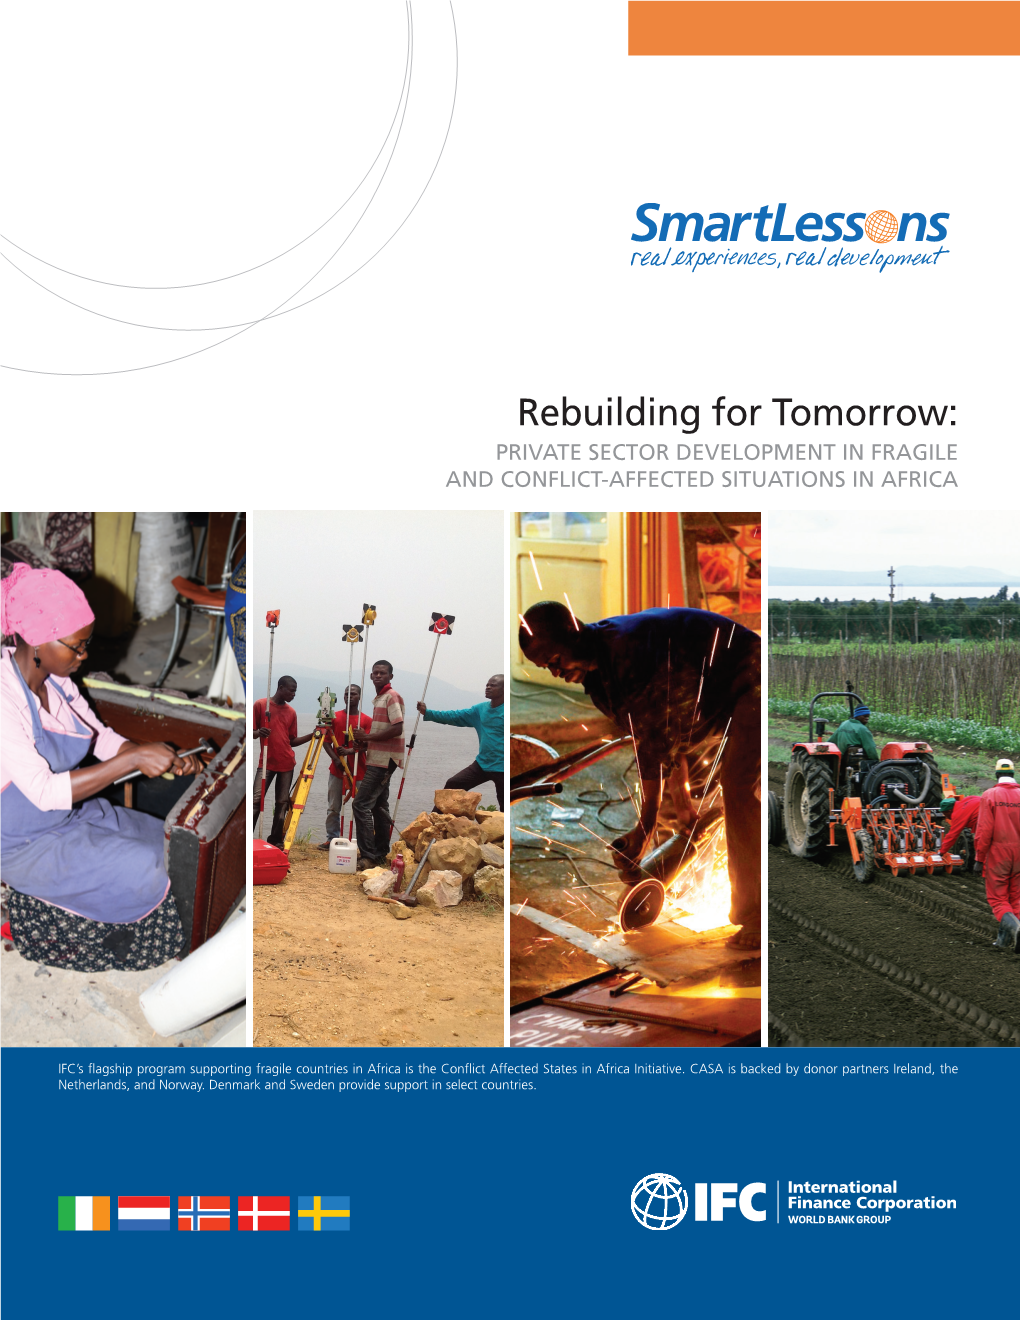 Rebuilding for Tomorrow: Private Sector Development in Fragile and Conflict Affected Situation in Africa